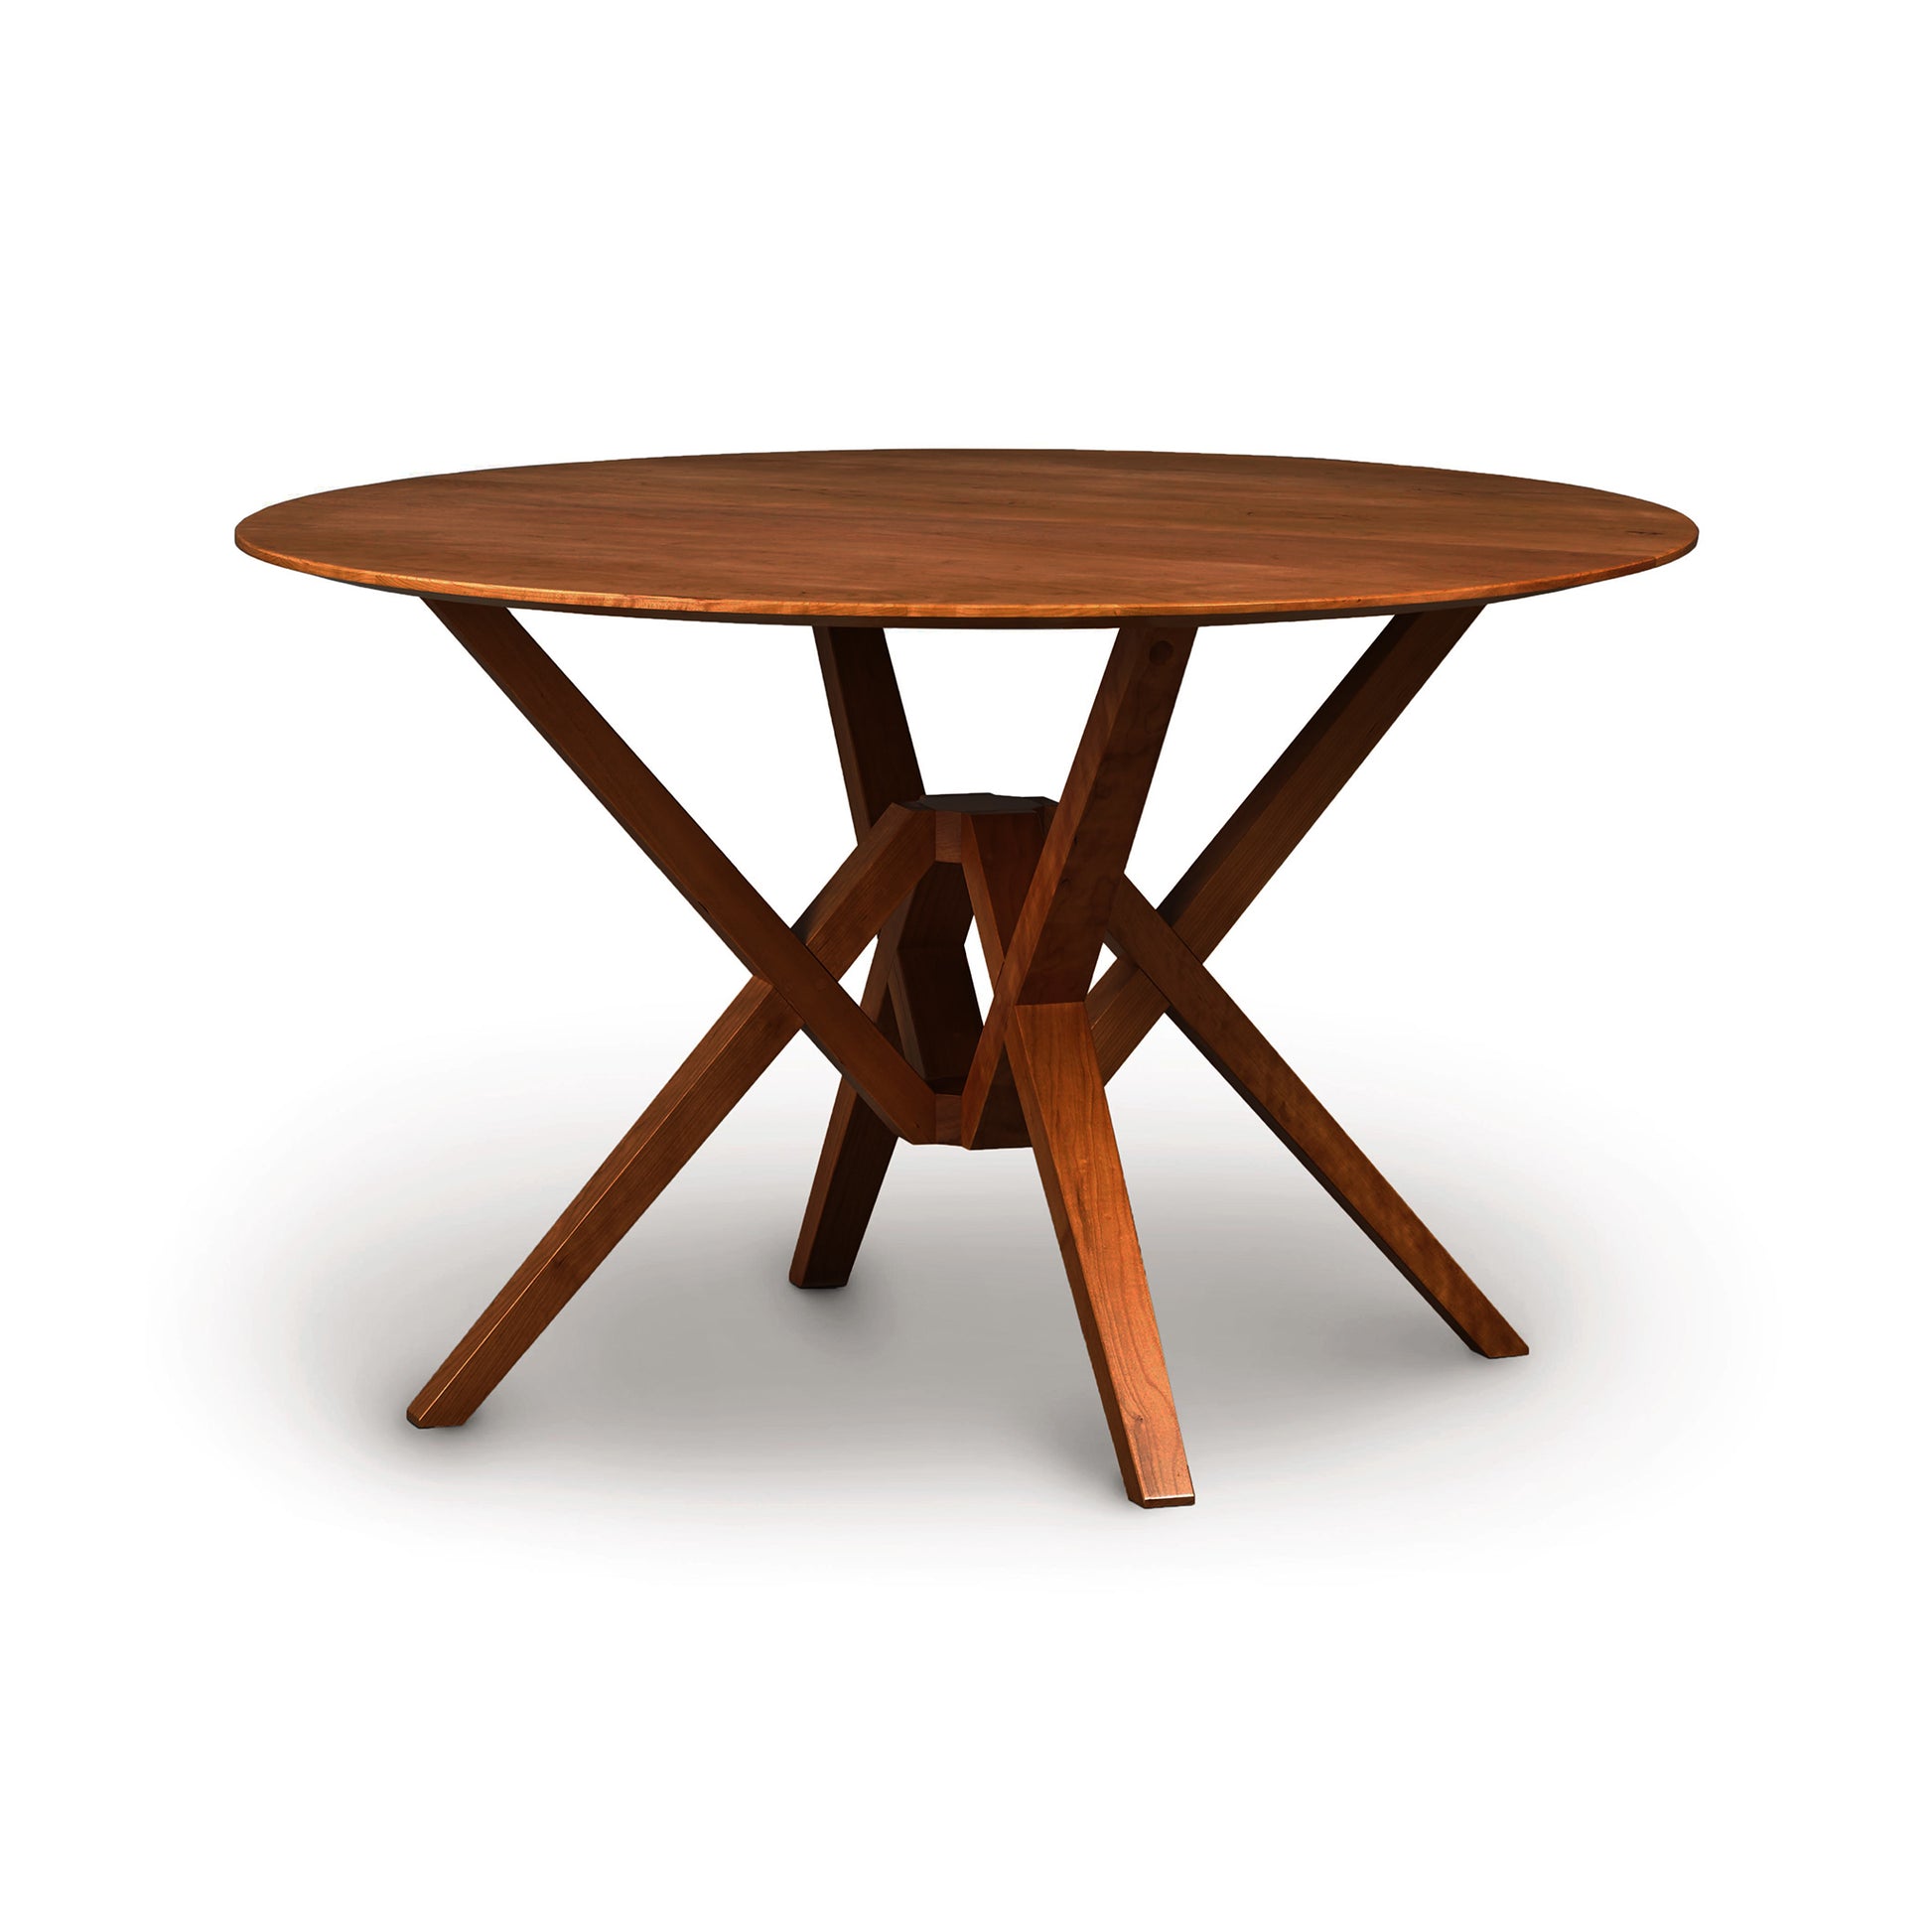 A round, Copeland Furniture Exeter Round Solid Top Dining Table made from sustainably harvested hardwoods with a crossed-leg support design, isolated on a white background.